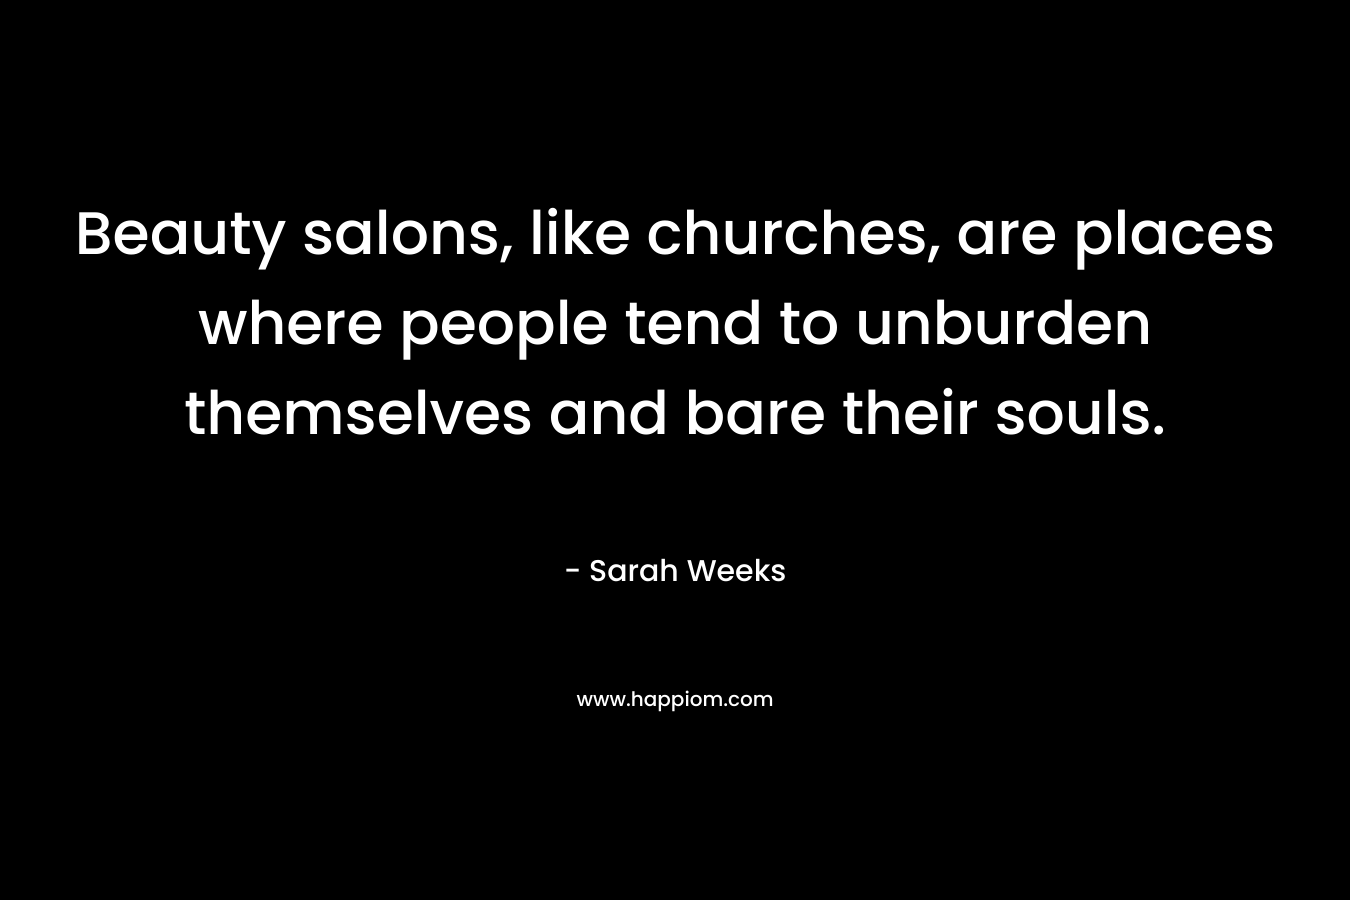 Beauty salons, like churches, are places where people tend to unburden themselves and bare their souls.